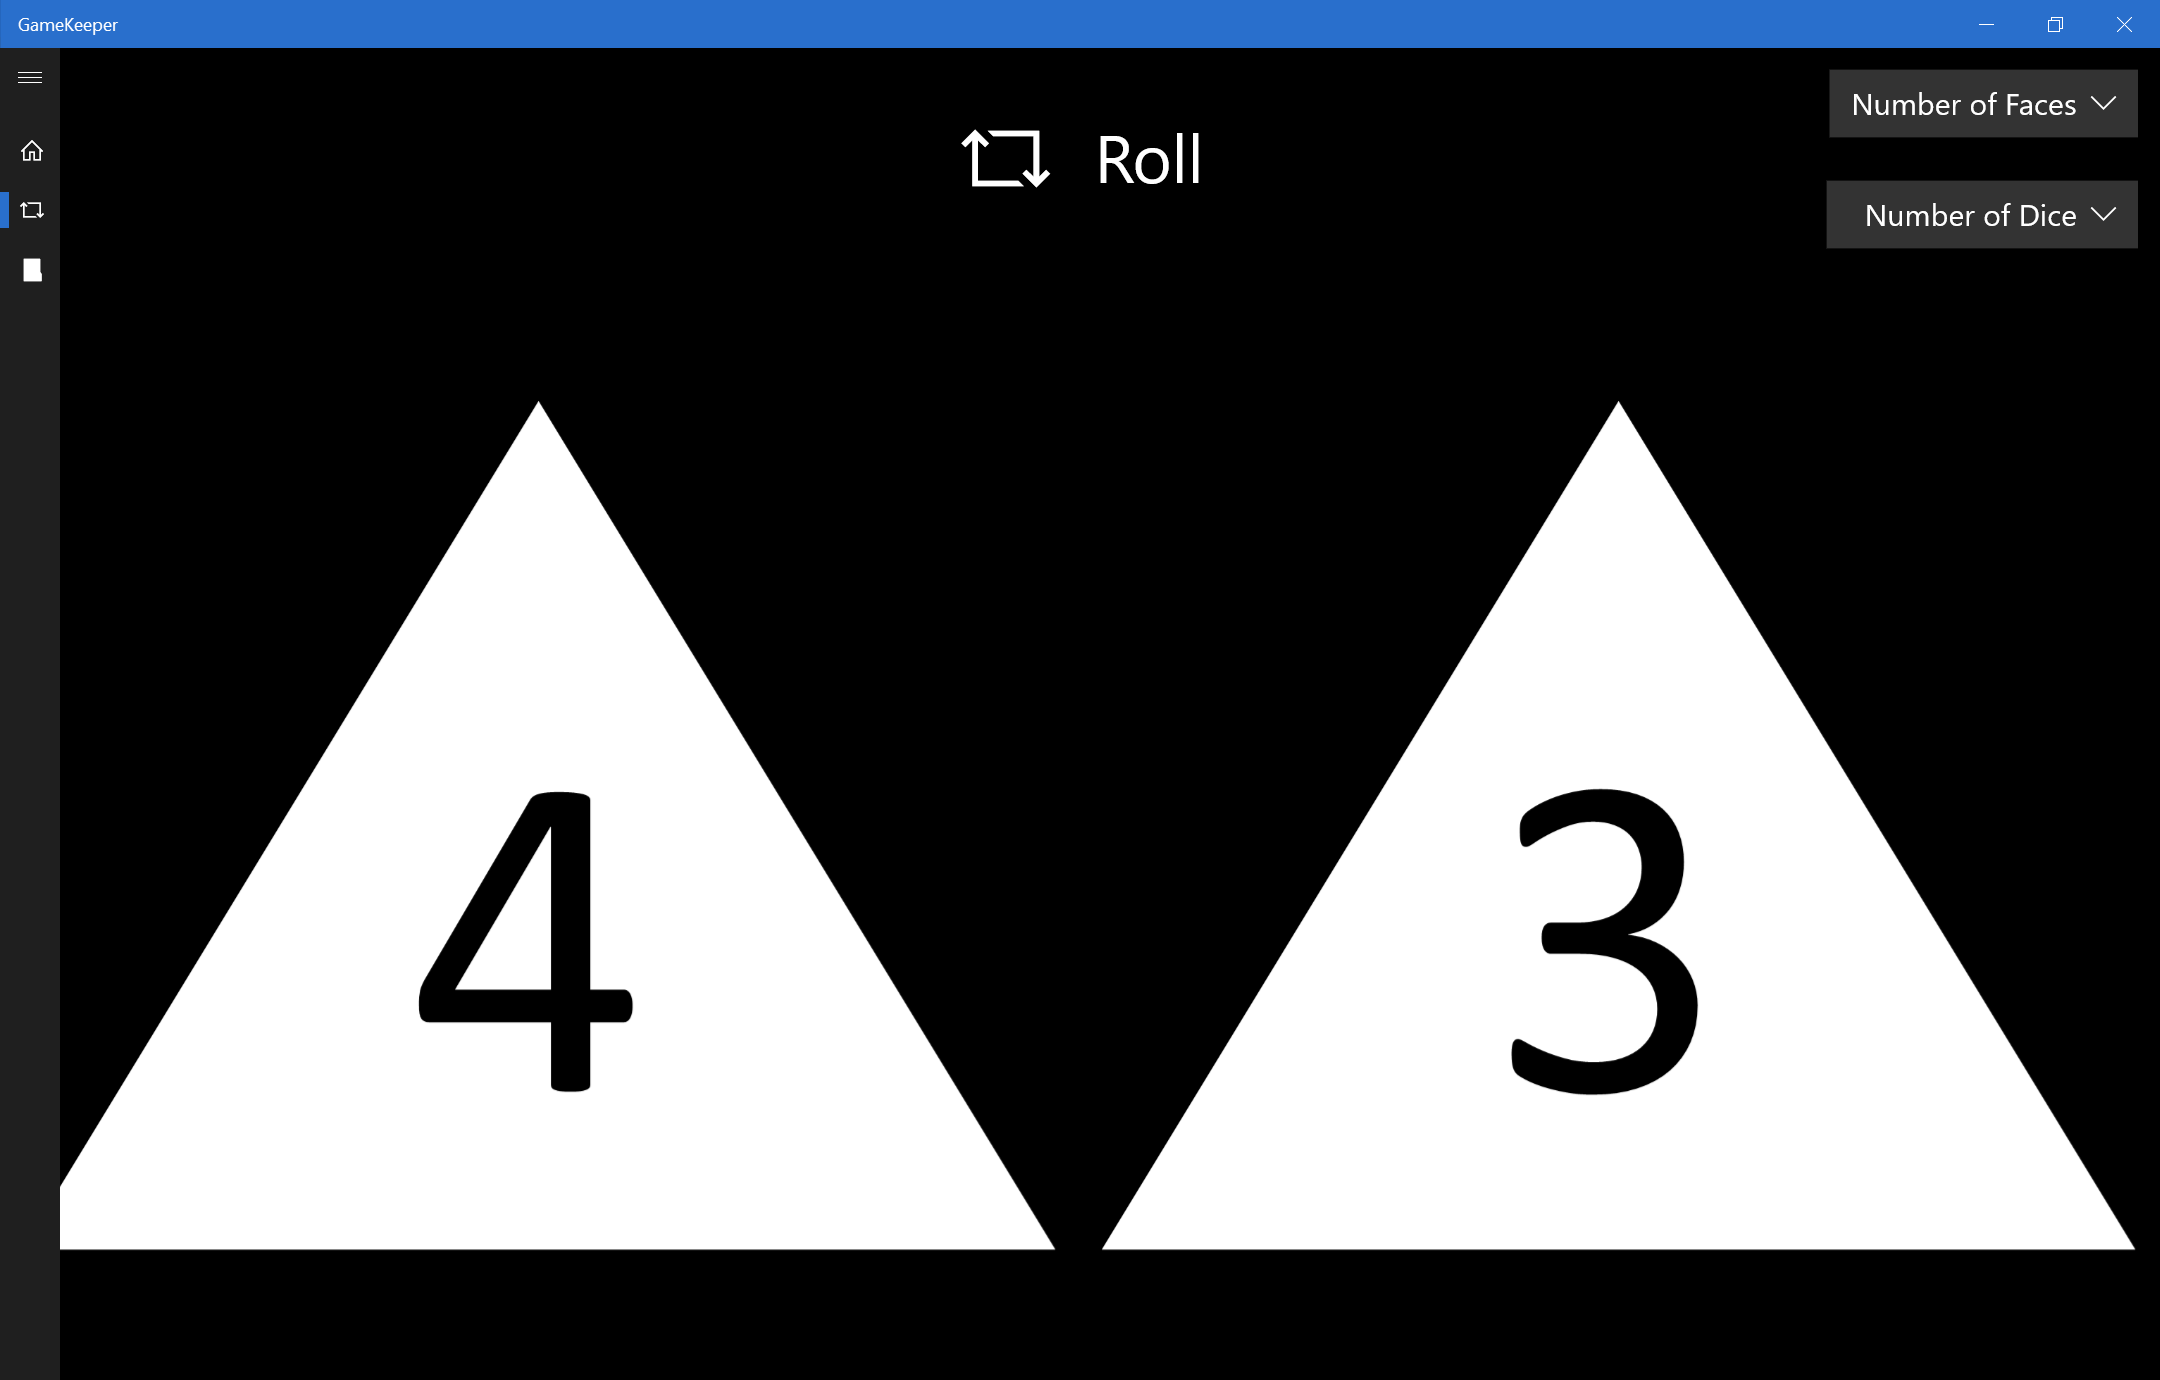 GameKeeper can also roll two four-sided dice.